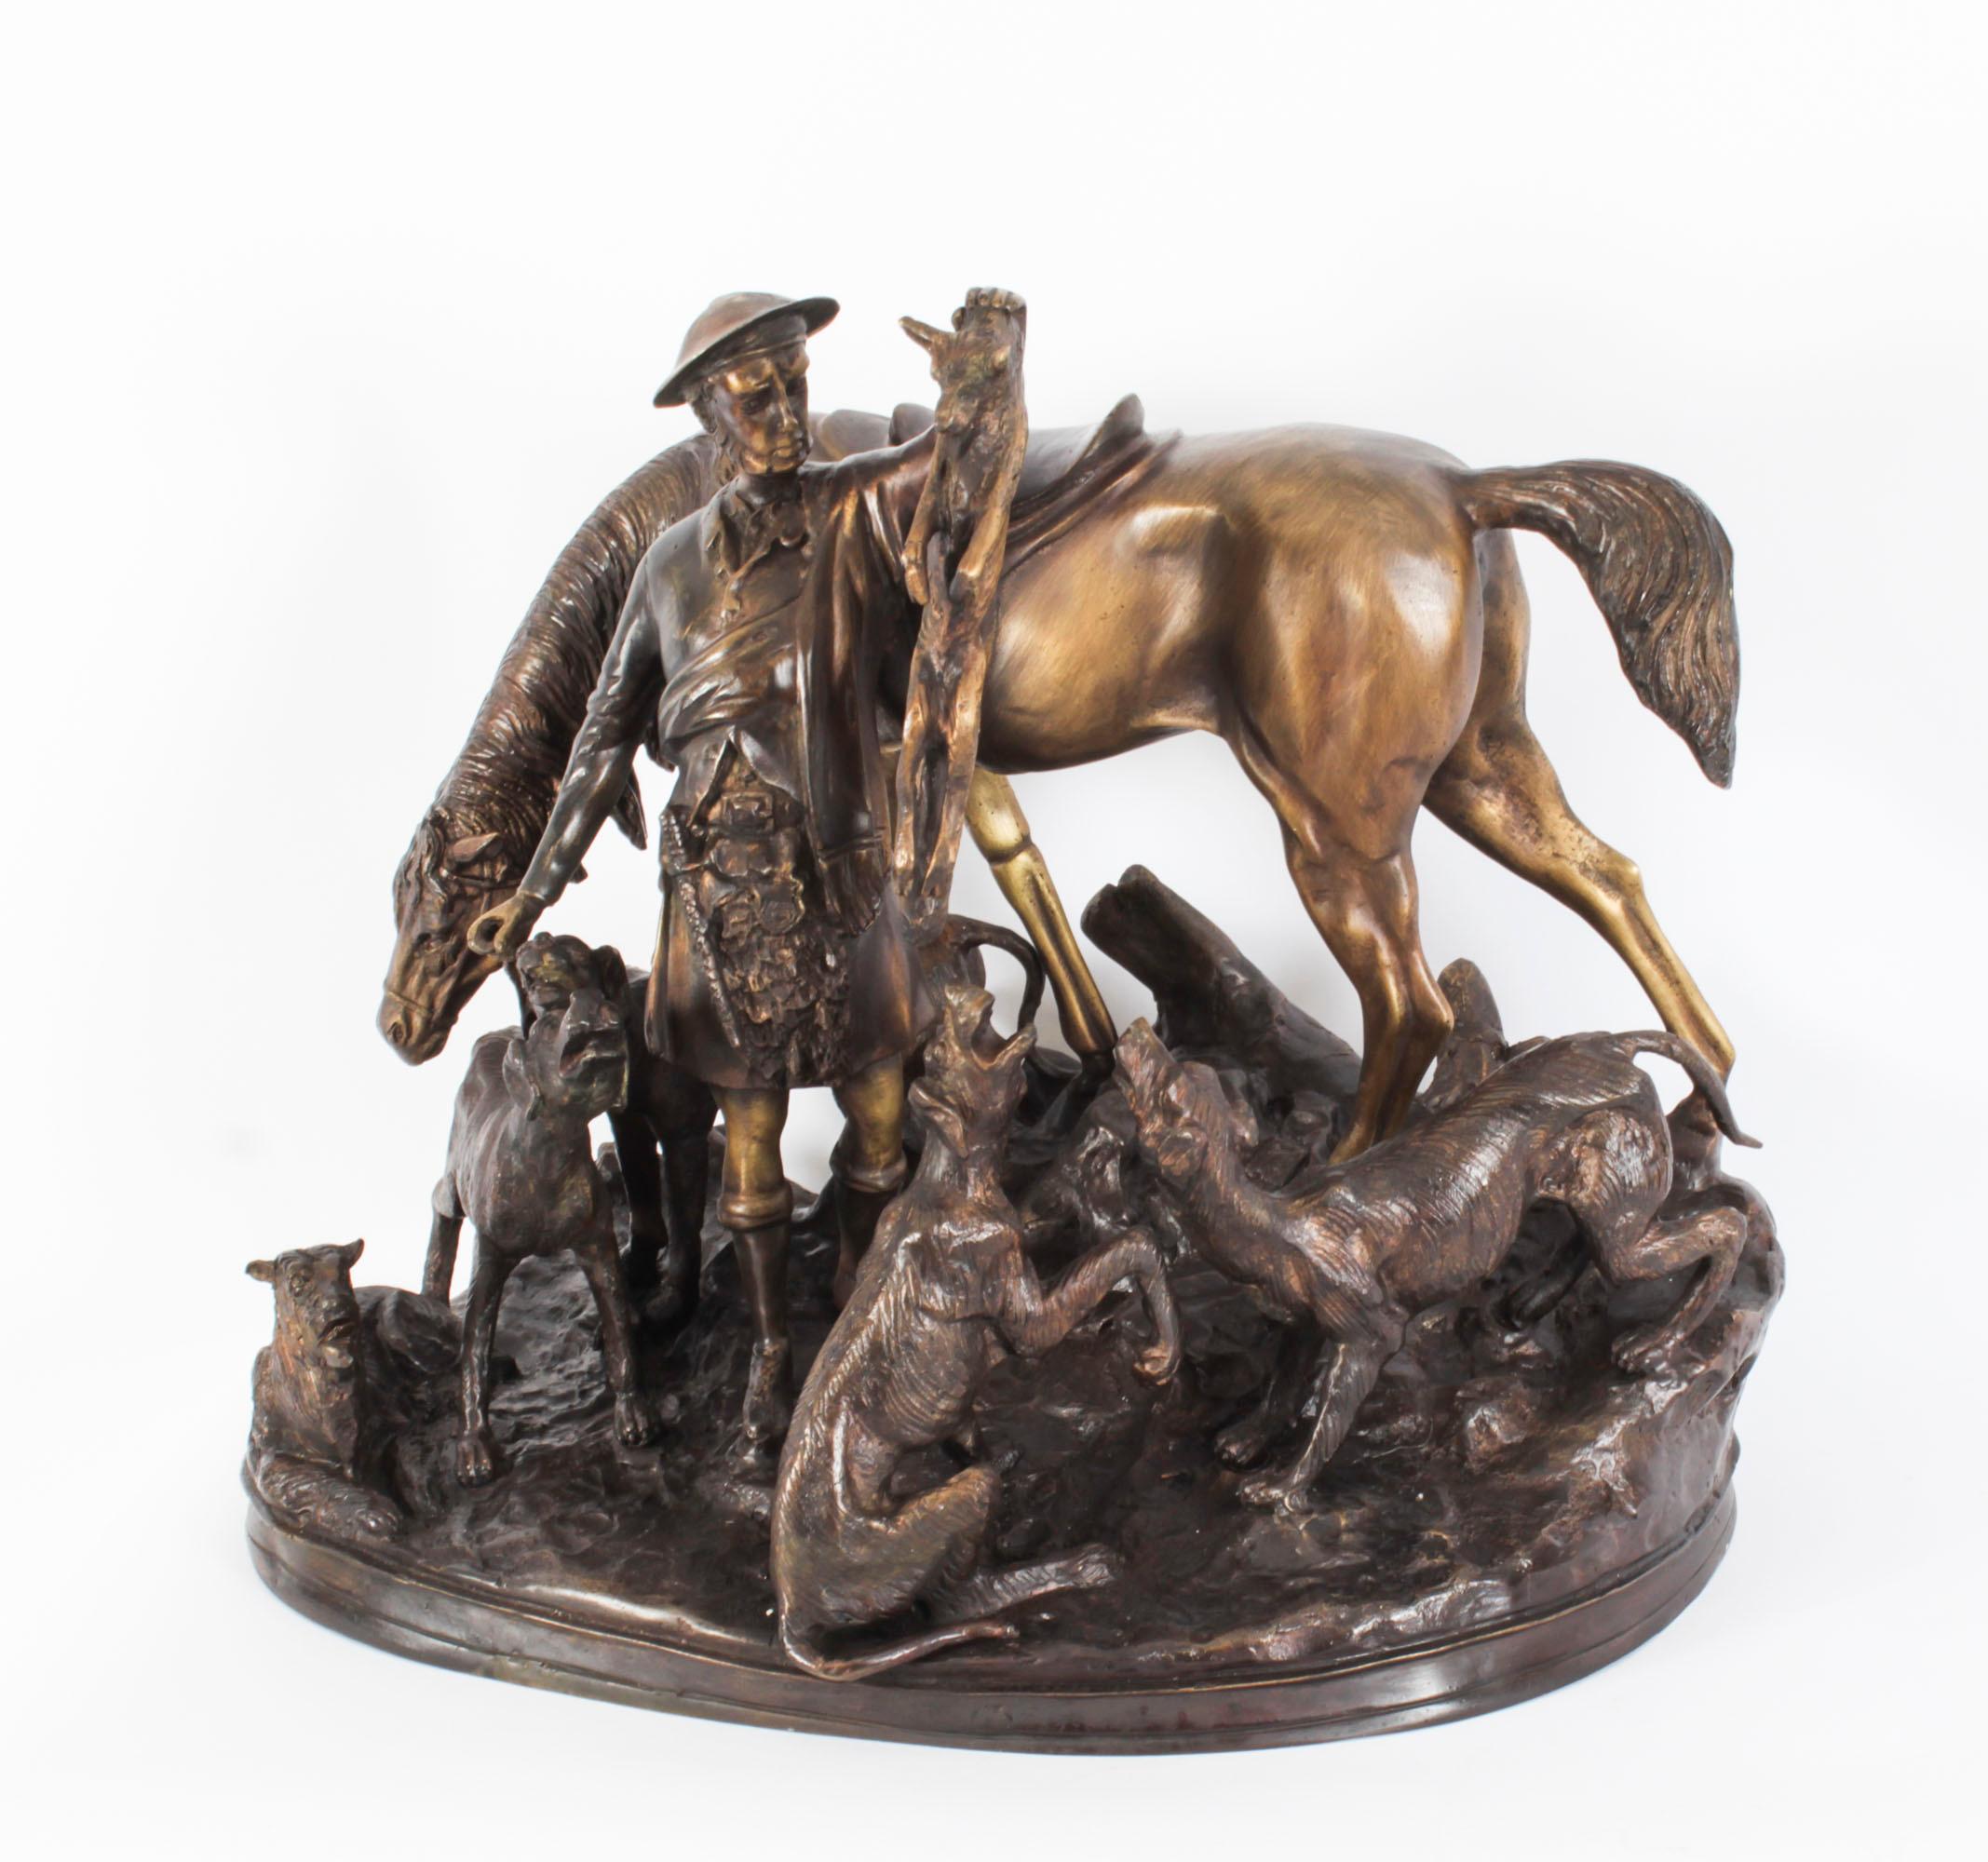 This is a superb vintage patinated bronze group of a hunter holding a fox over his hounds, dating from the late 20th Century.

The bronze comprises a central Scottish hunter dressed in a traditional kilt holding a fox surounded by his hounds, with